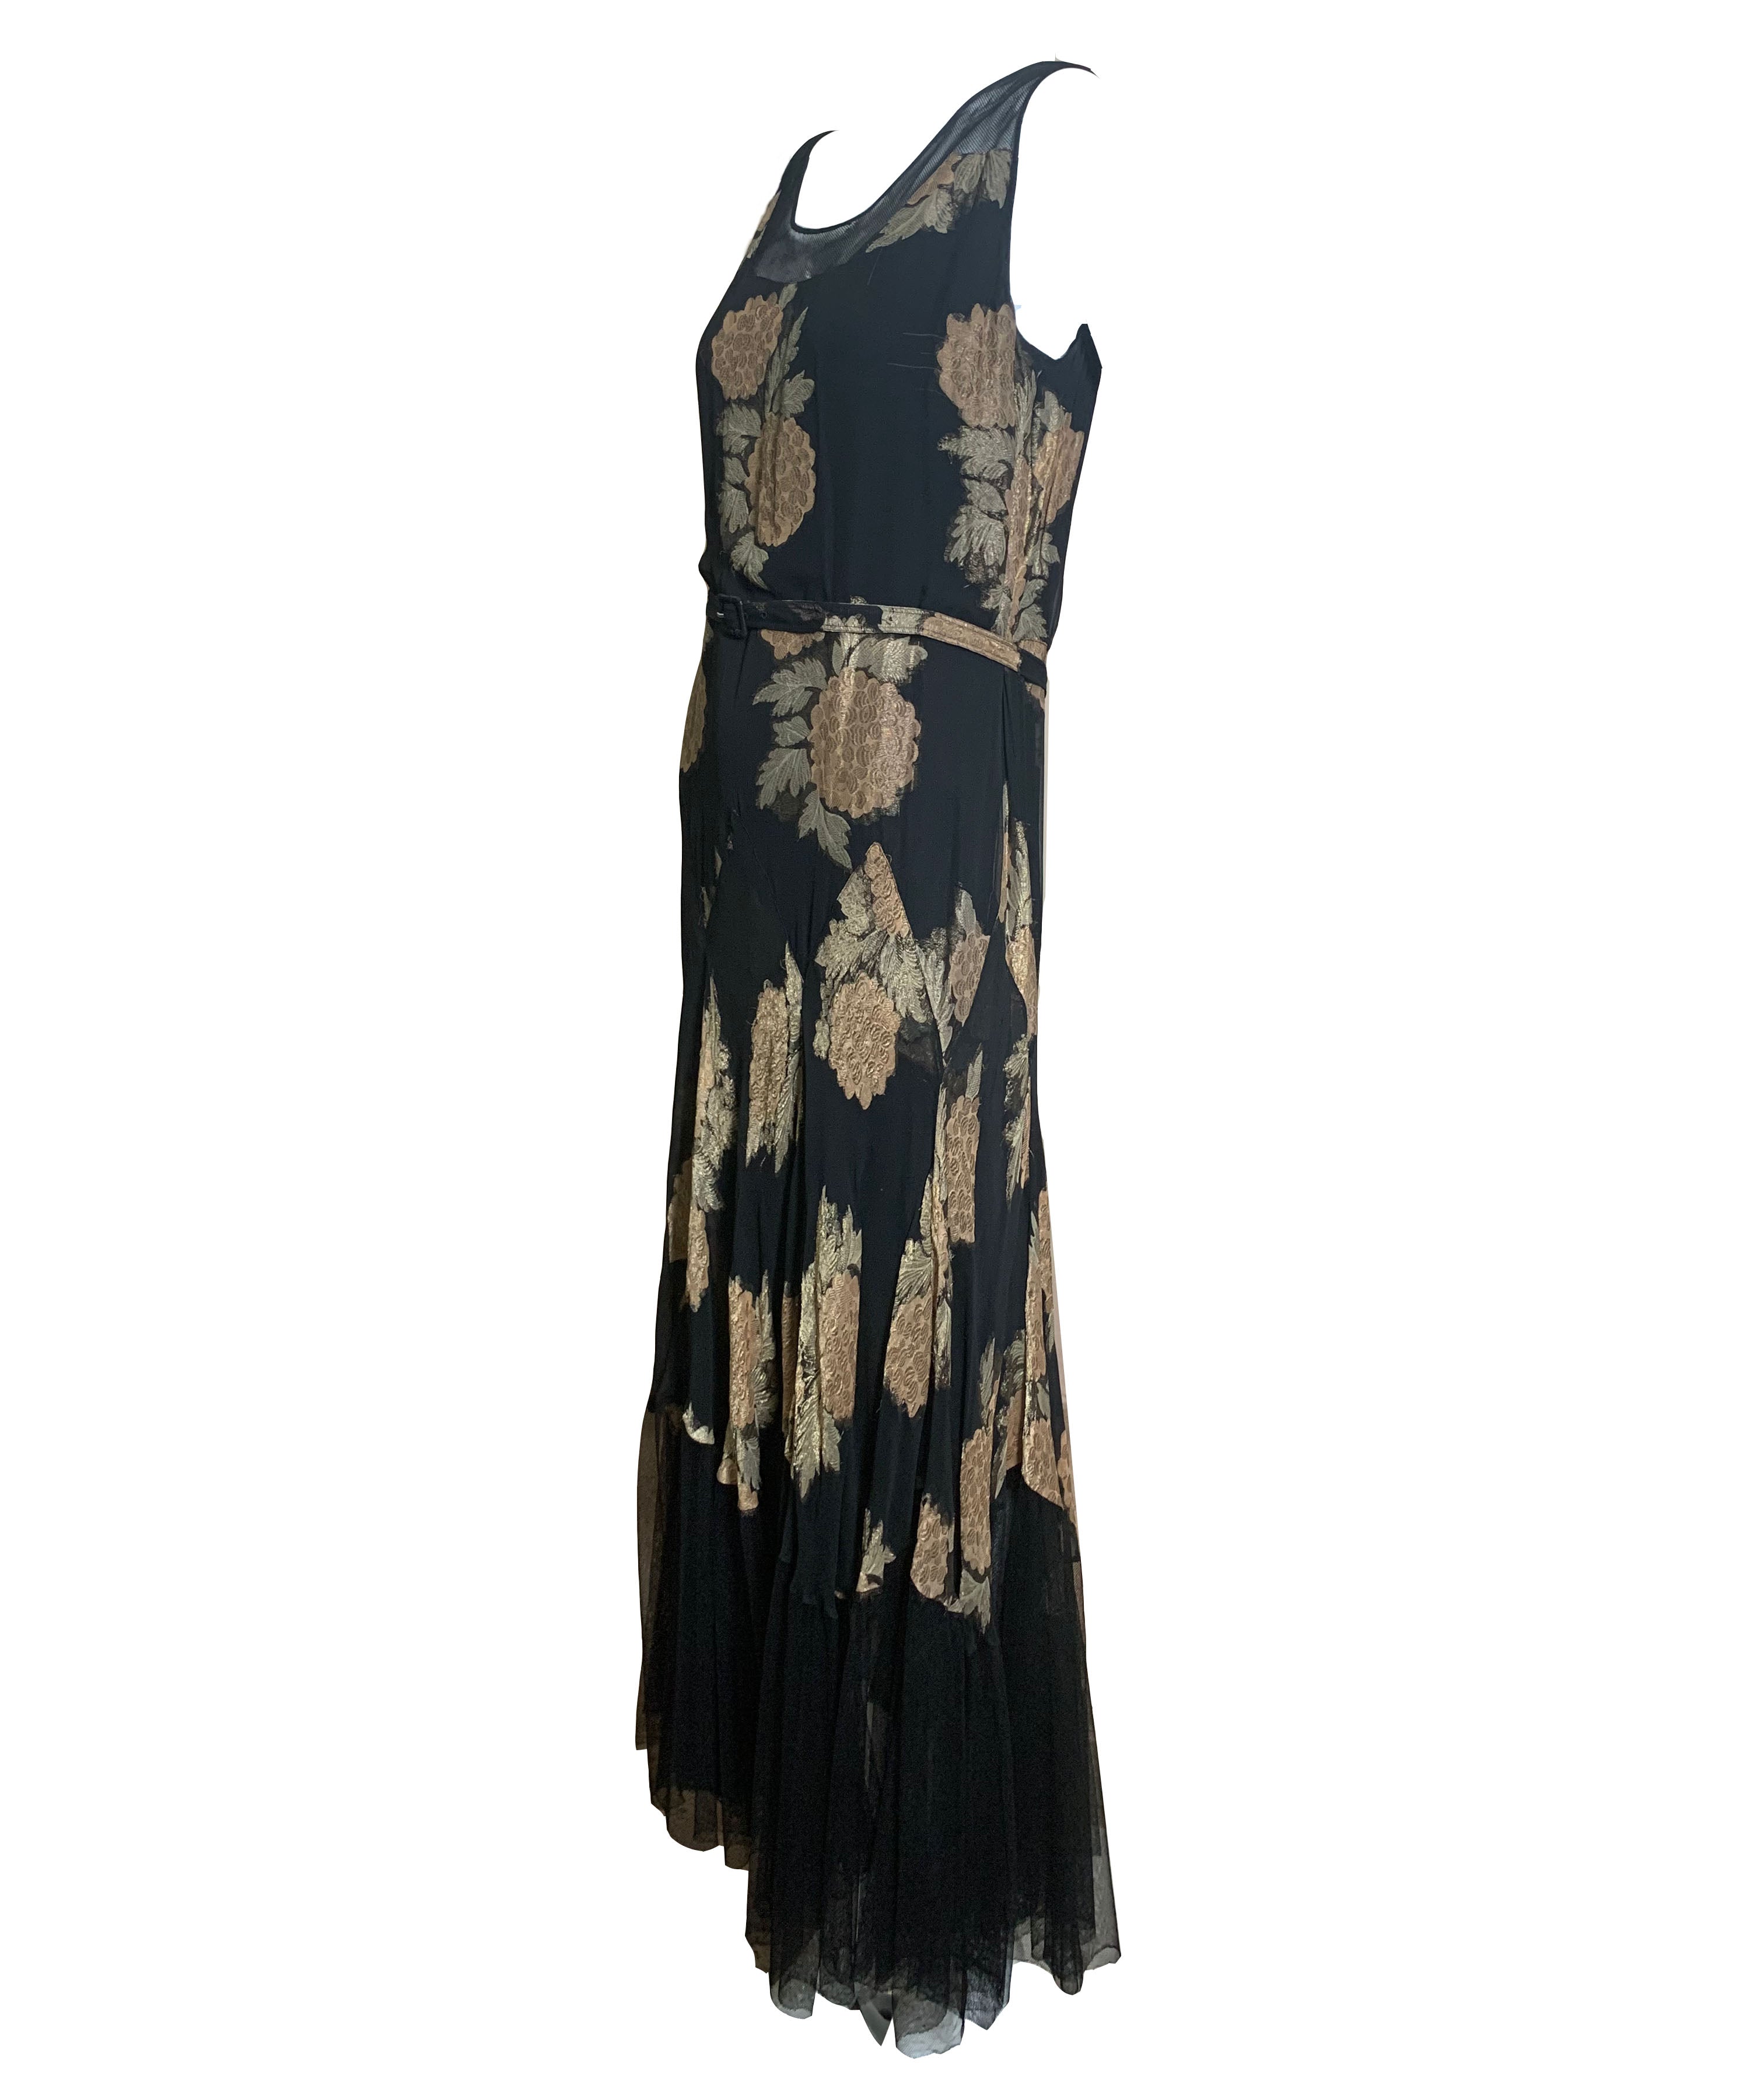 + 30s Lord and Taylor  Black Gold Lame Floral Gown with Mesh Trim and Belt  SIDE 3 of 5